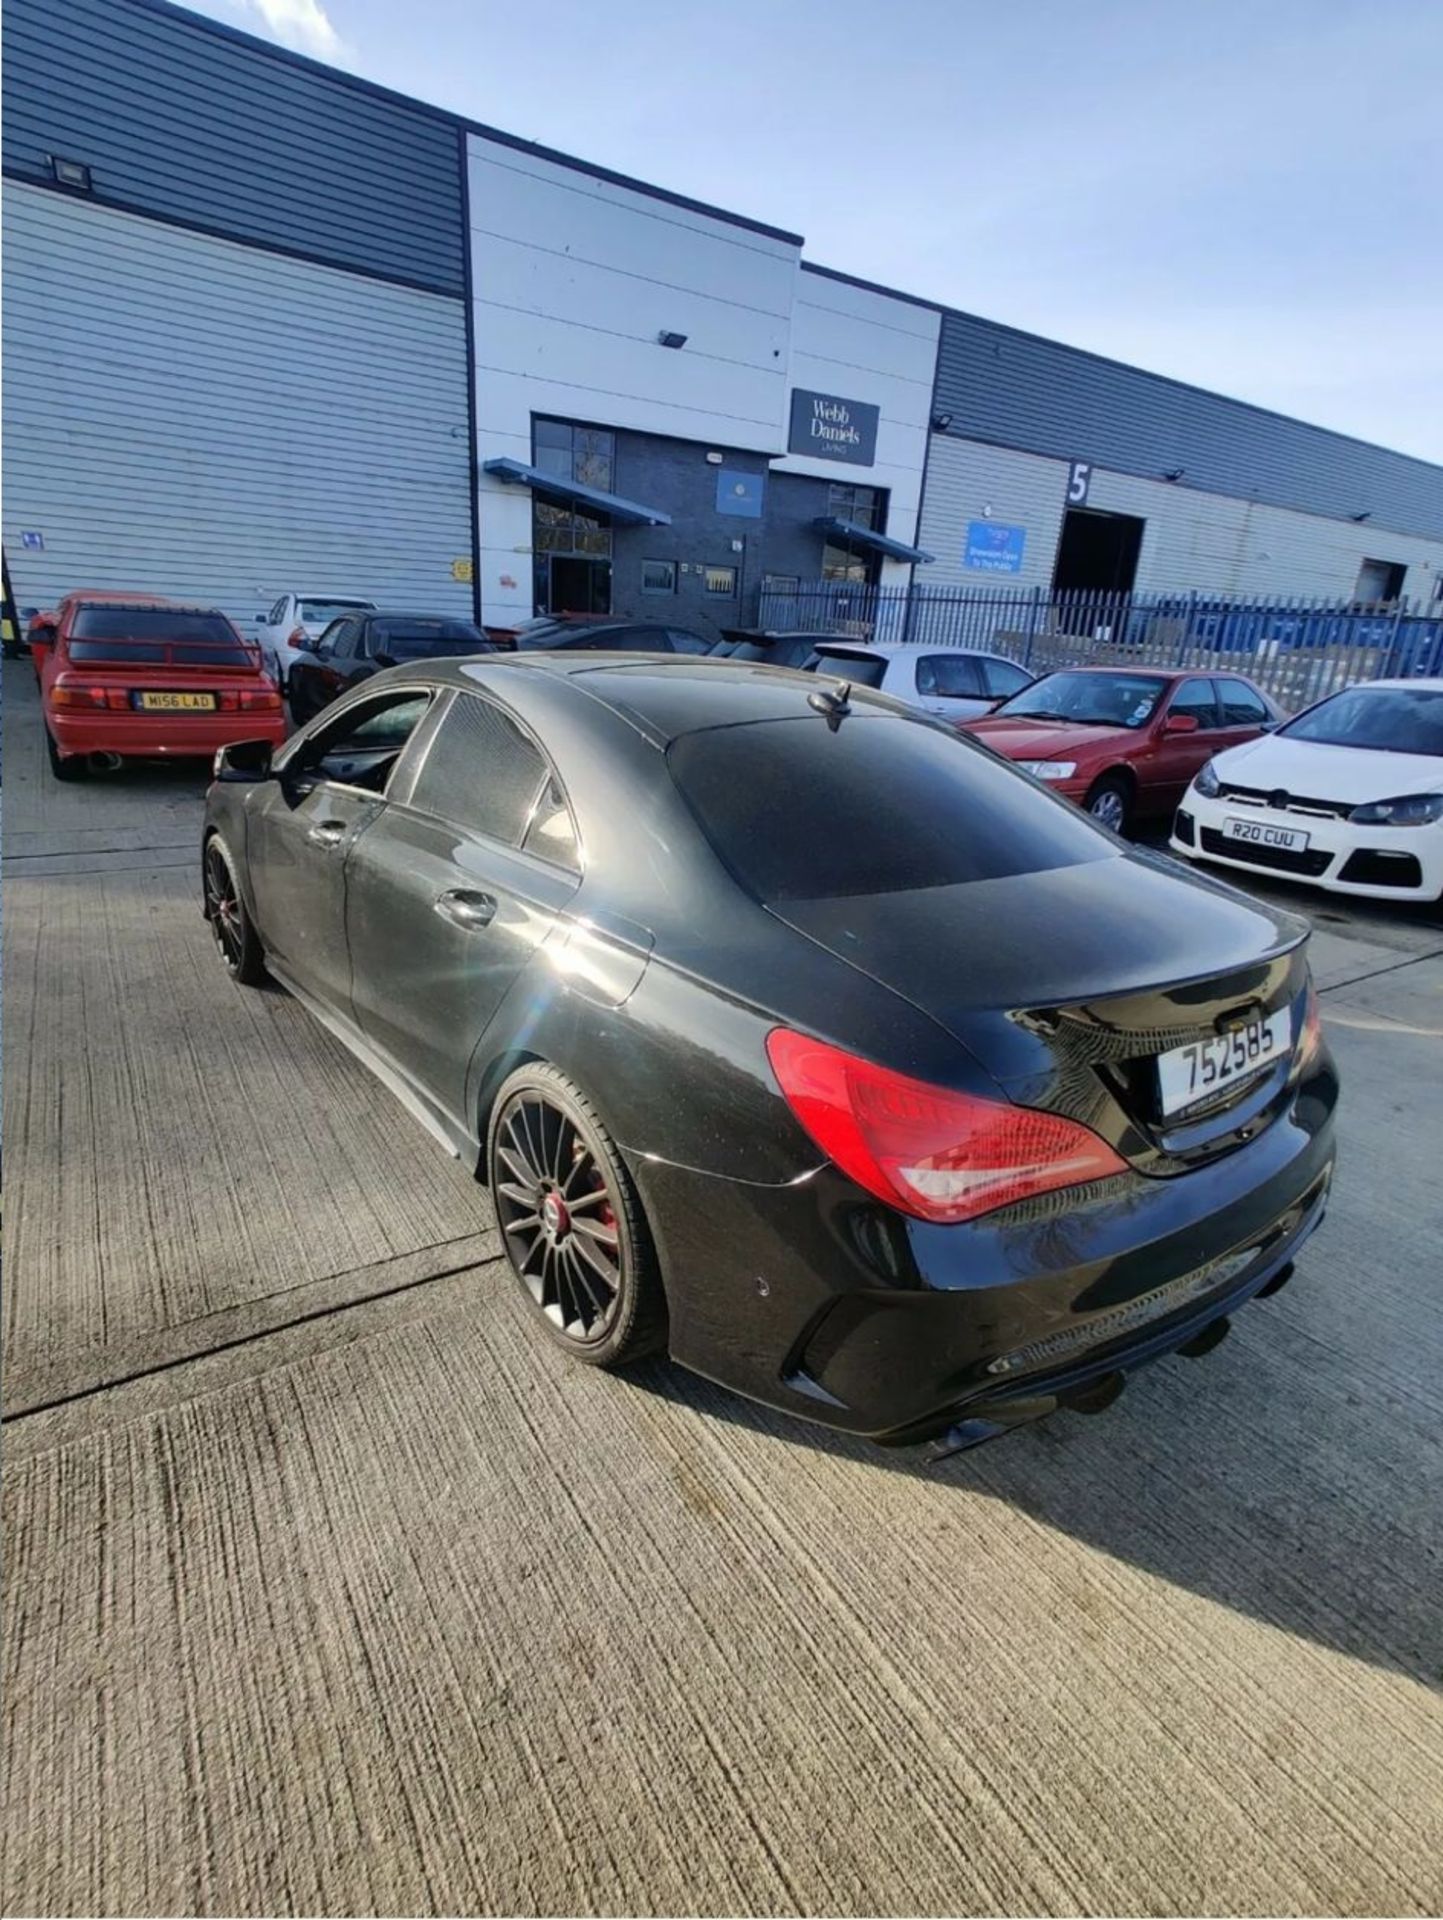 MERCEDES CLA45 AMG TOP SPEC EDITION ONE LIMITED EDITION 1 OF 500, BUCKET SEATS LHD, 40K MILES - Image 2 of 9